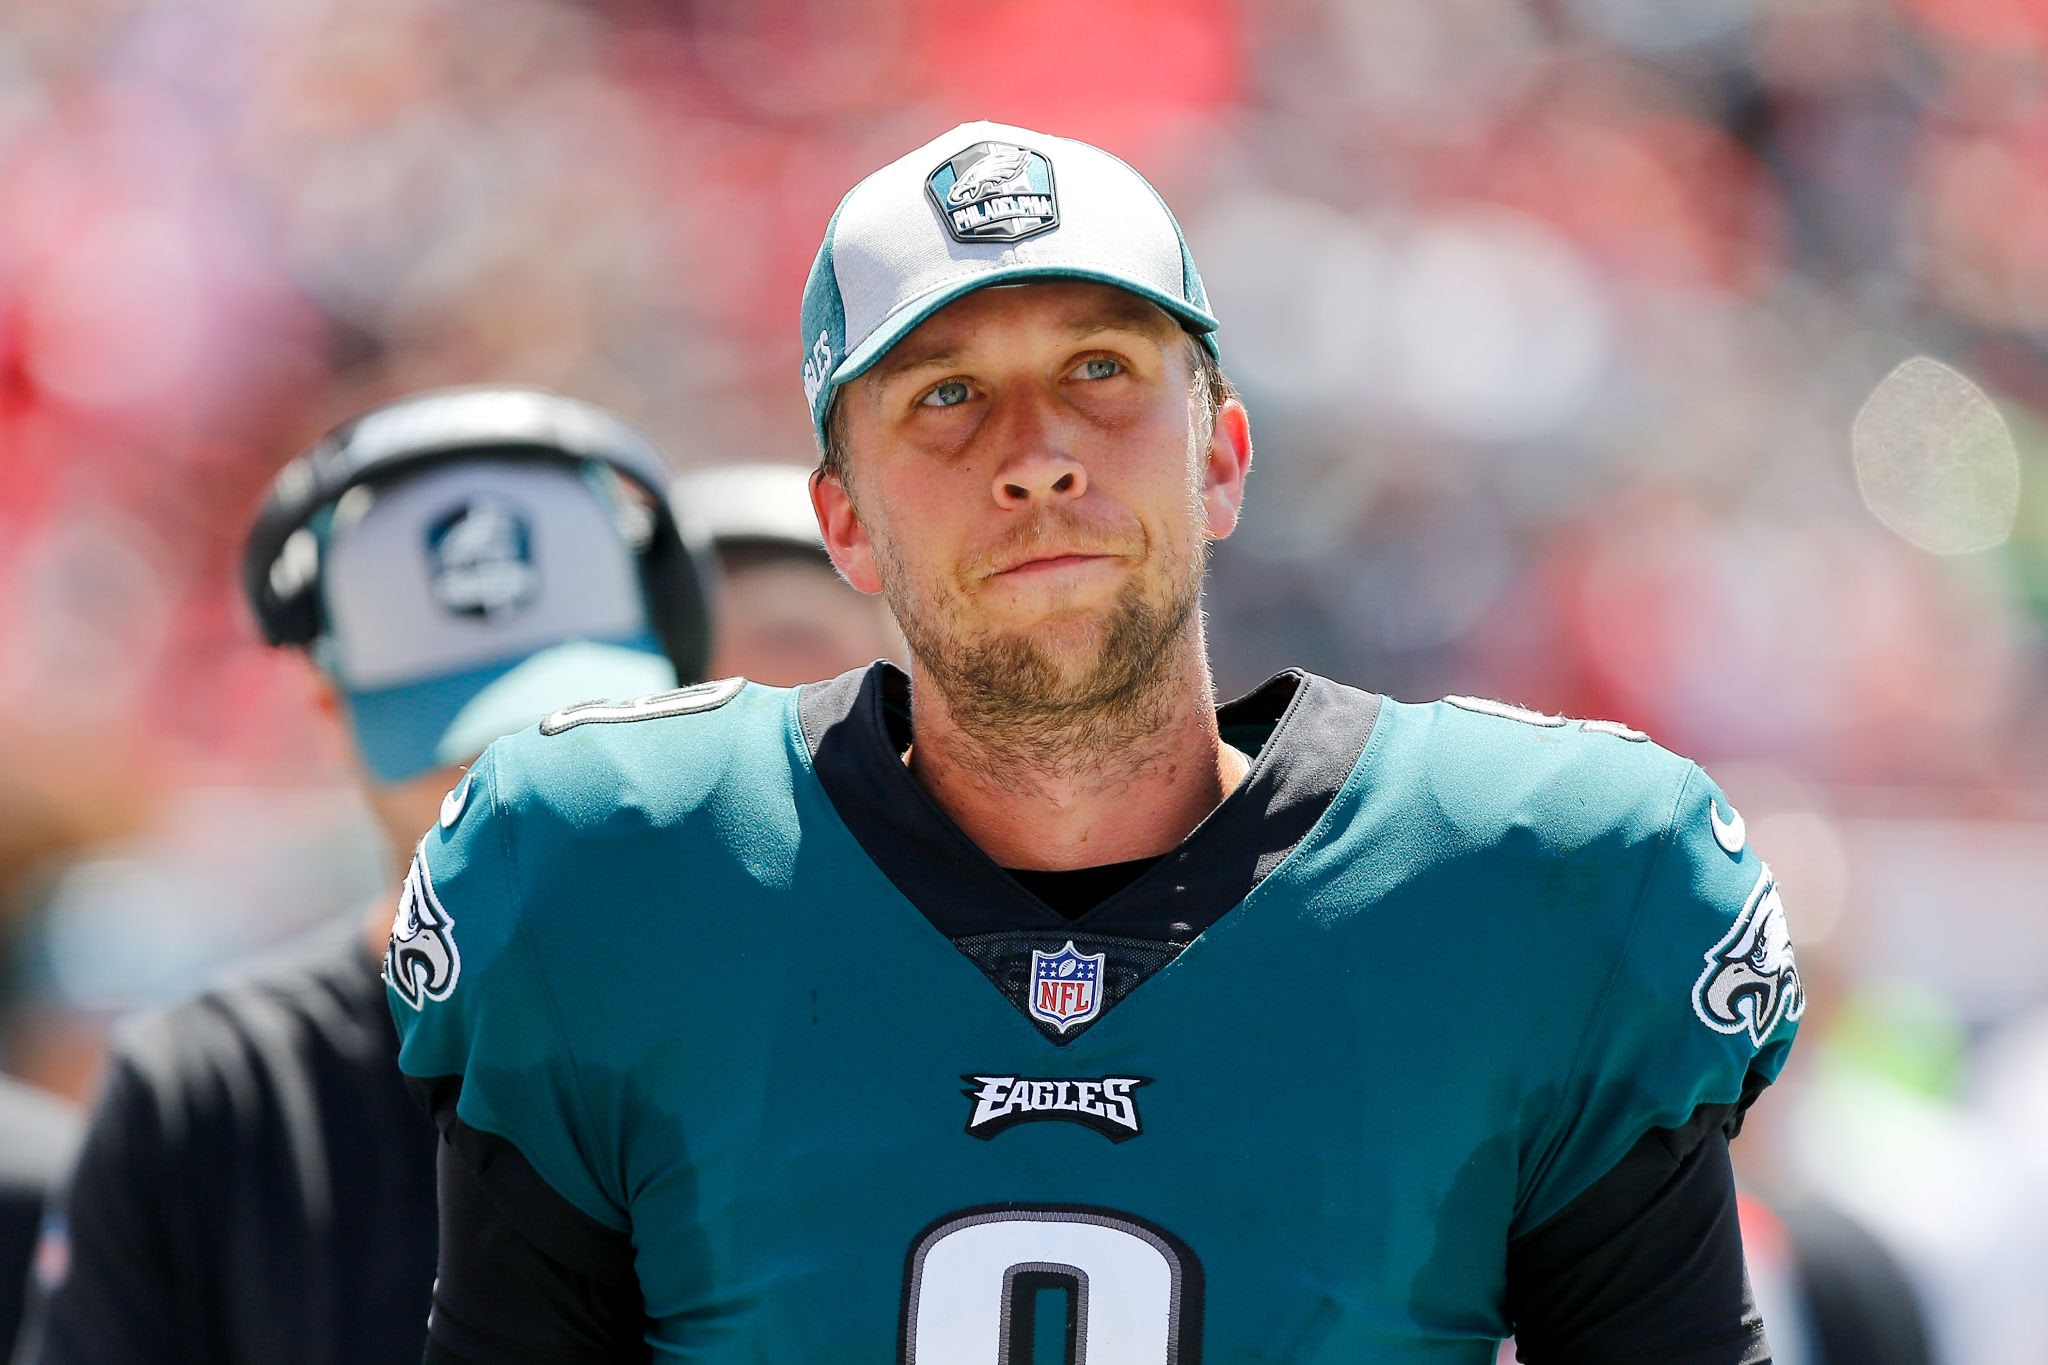 Nick Foles Net Worth 2022 Salary, Contract: How much does Nick Foles make a Year?